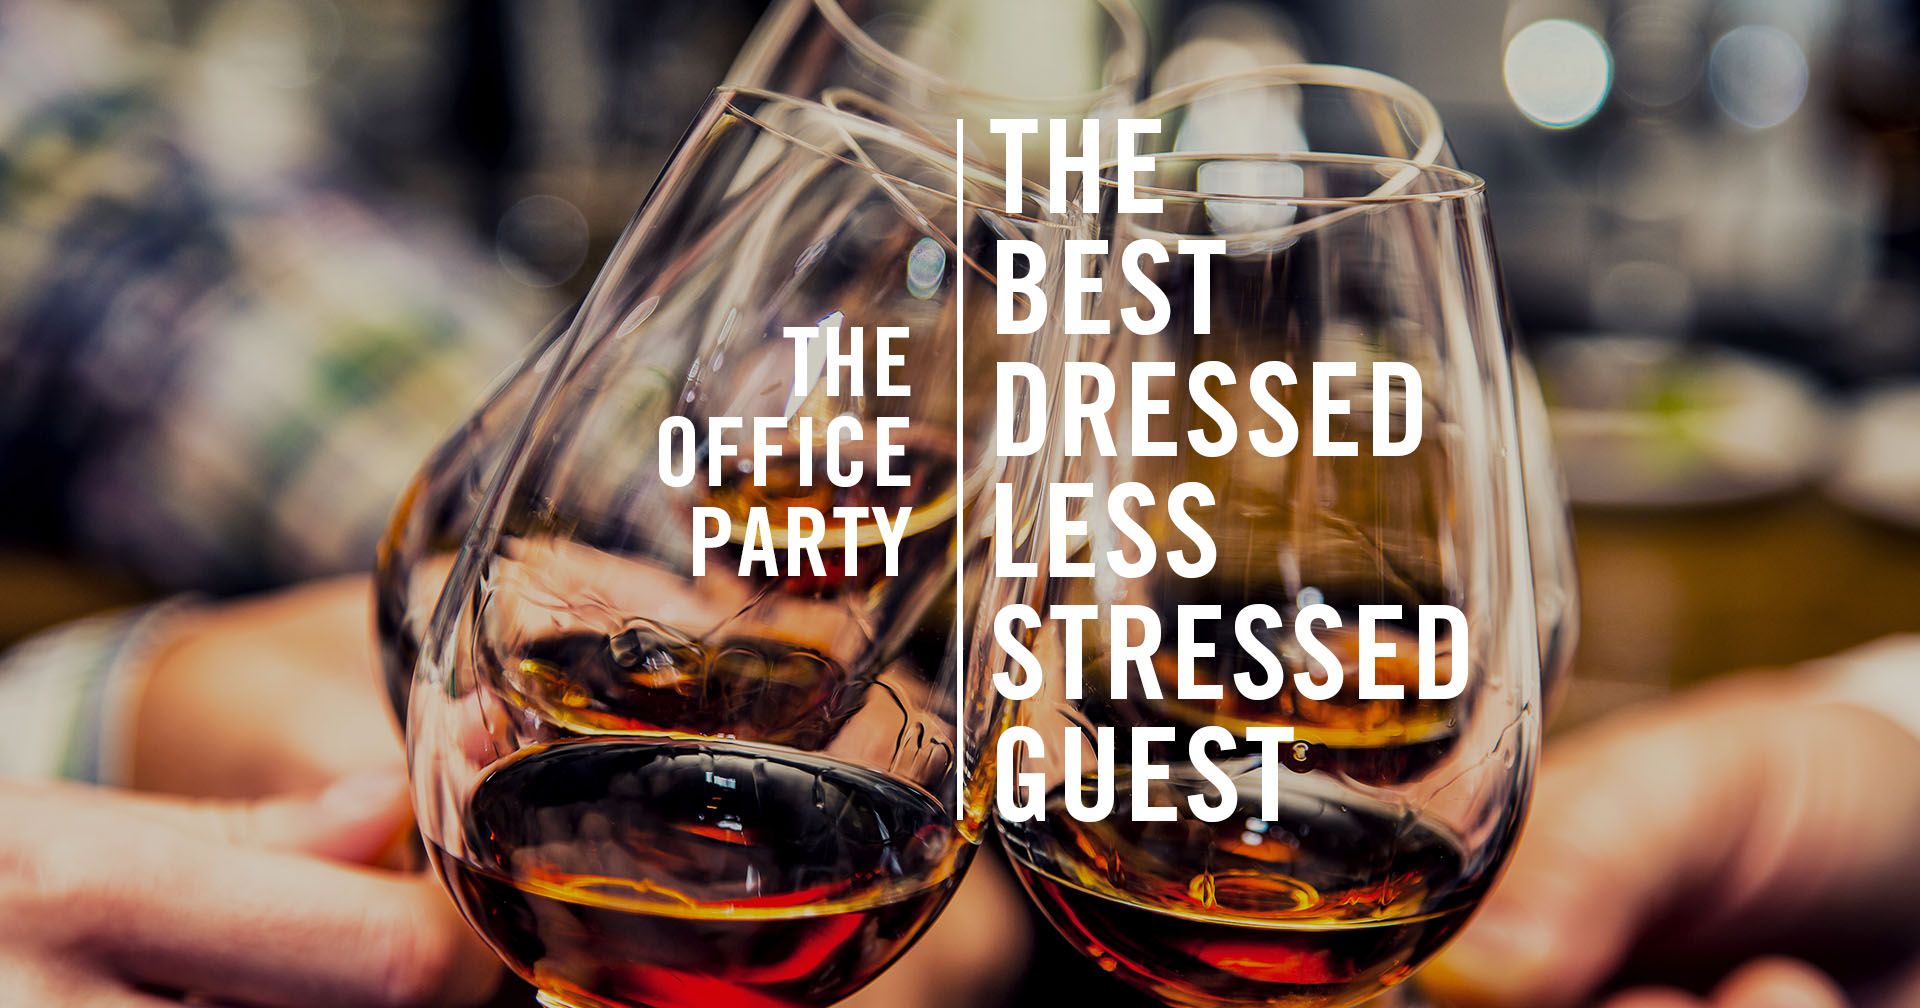 The Best Dressed Less Stressed Guest